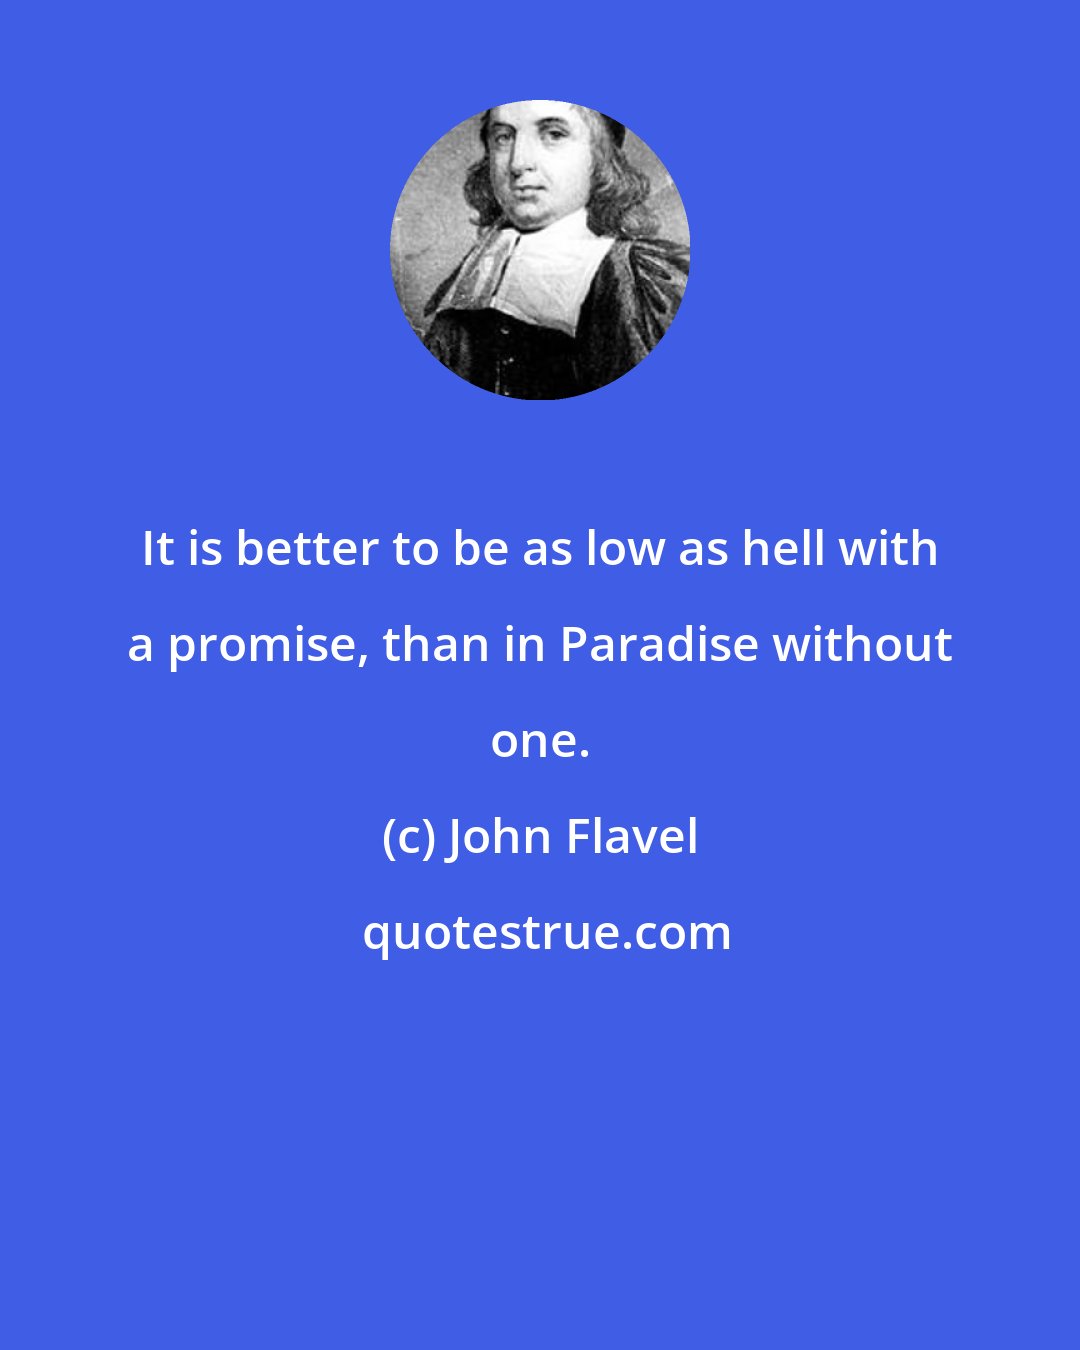 John Flavel: It is better to be as low as hell with a promise, than in Paradise without one.